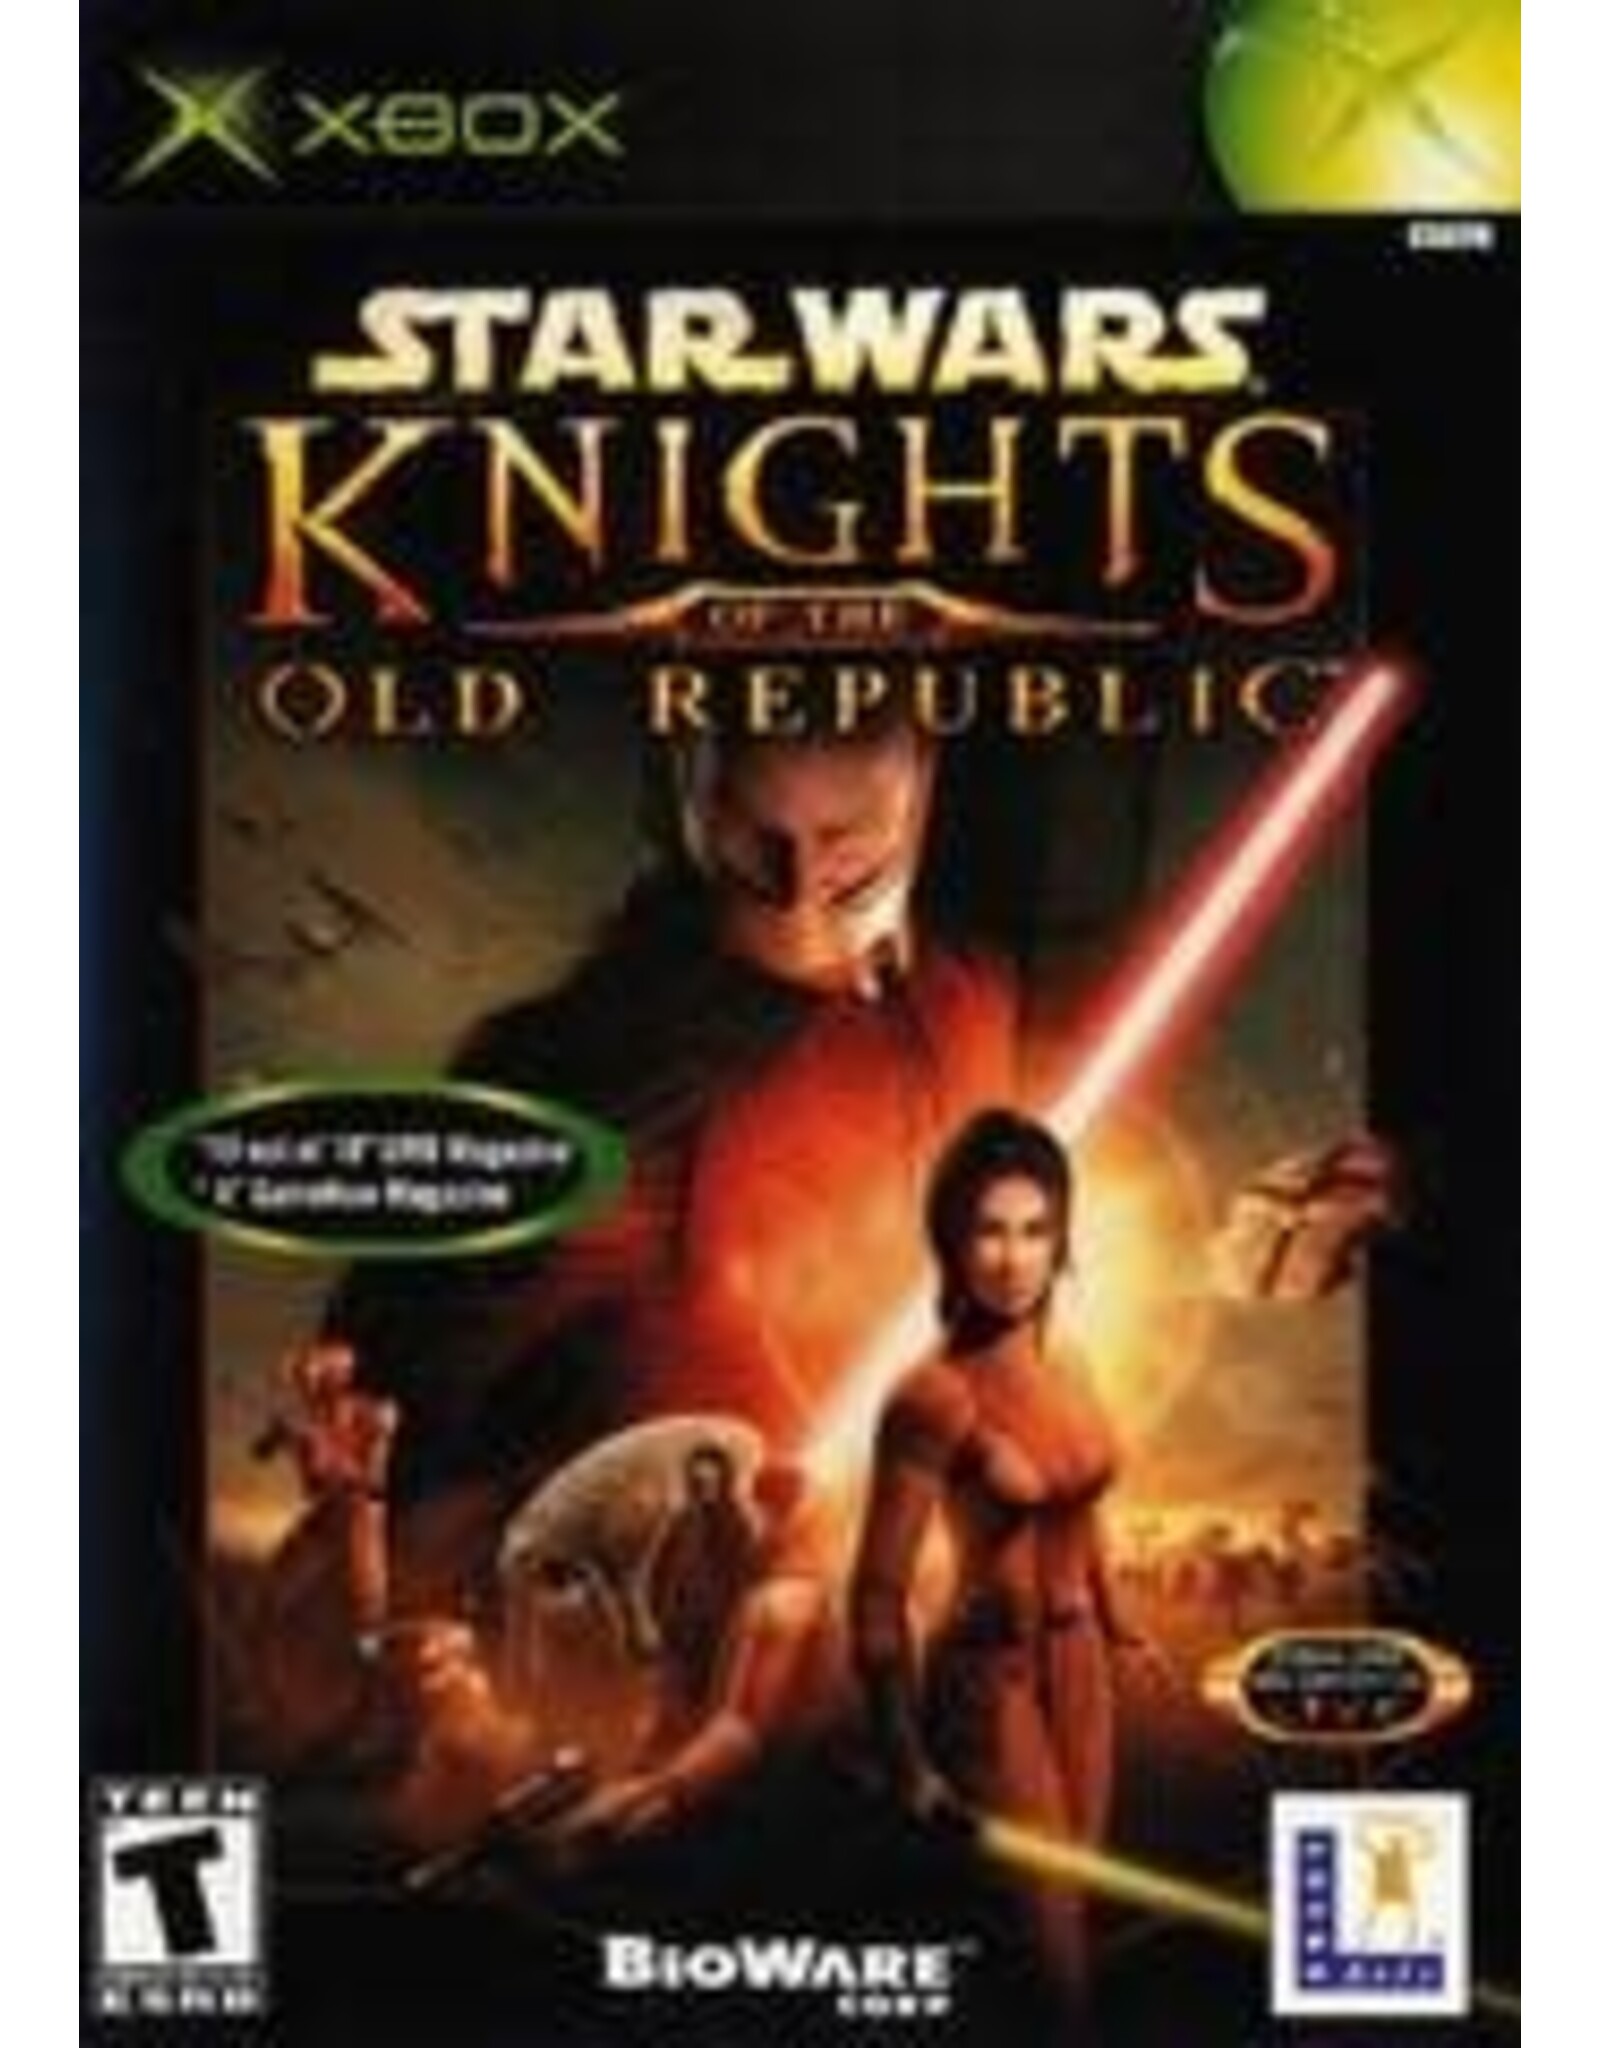 Xbox Star Wars Knights of the Old Republic (No Manual)